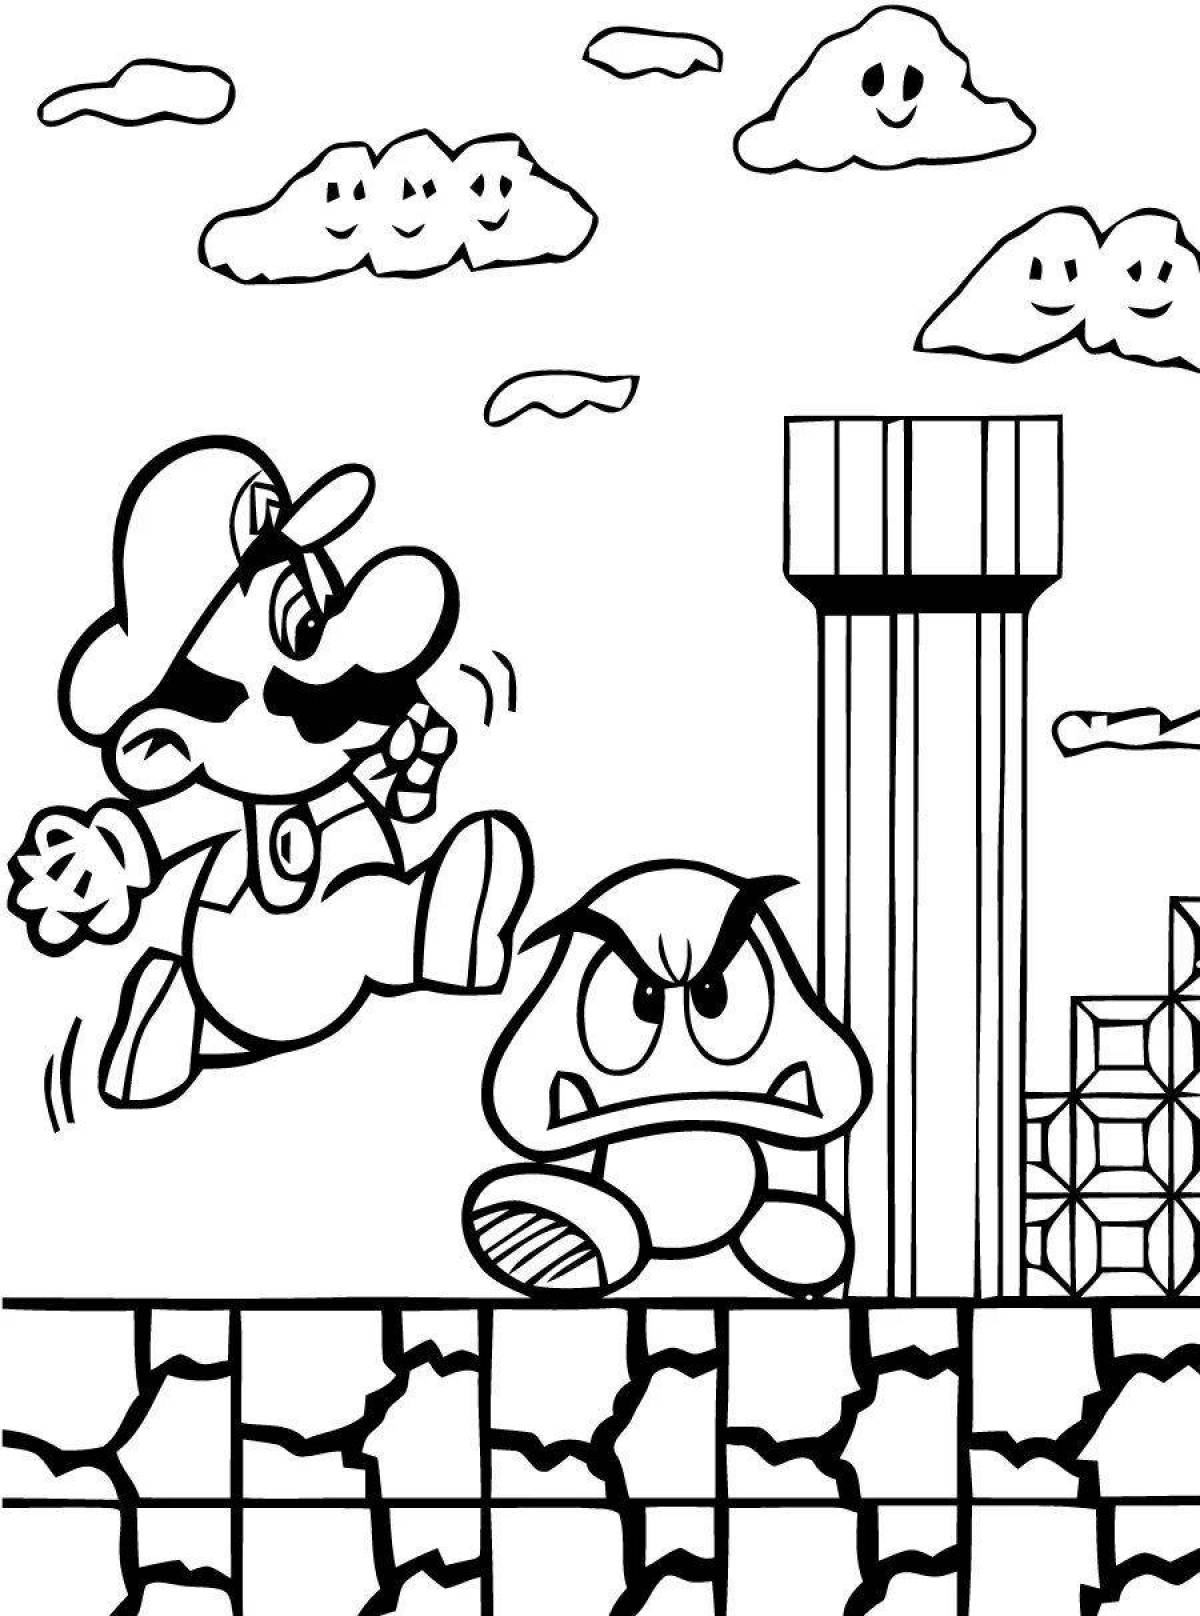 Mario for kids #13